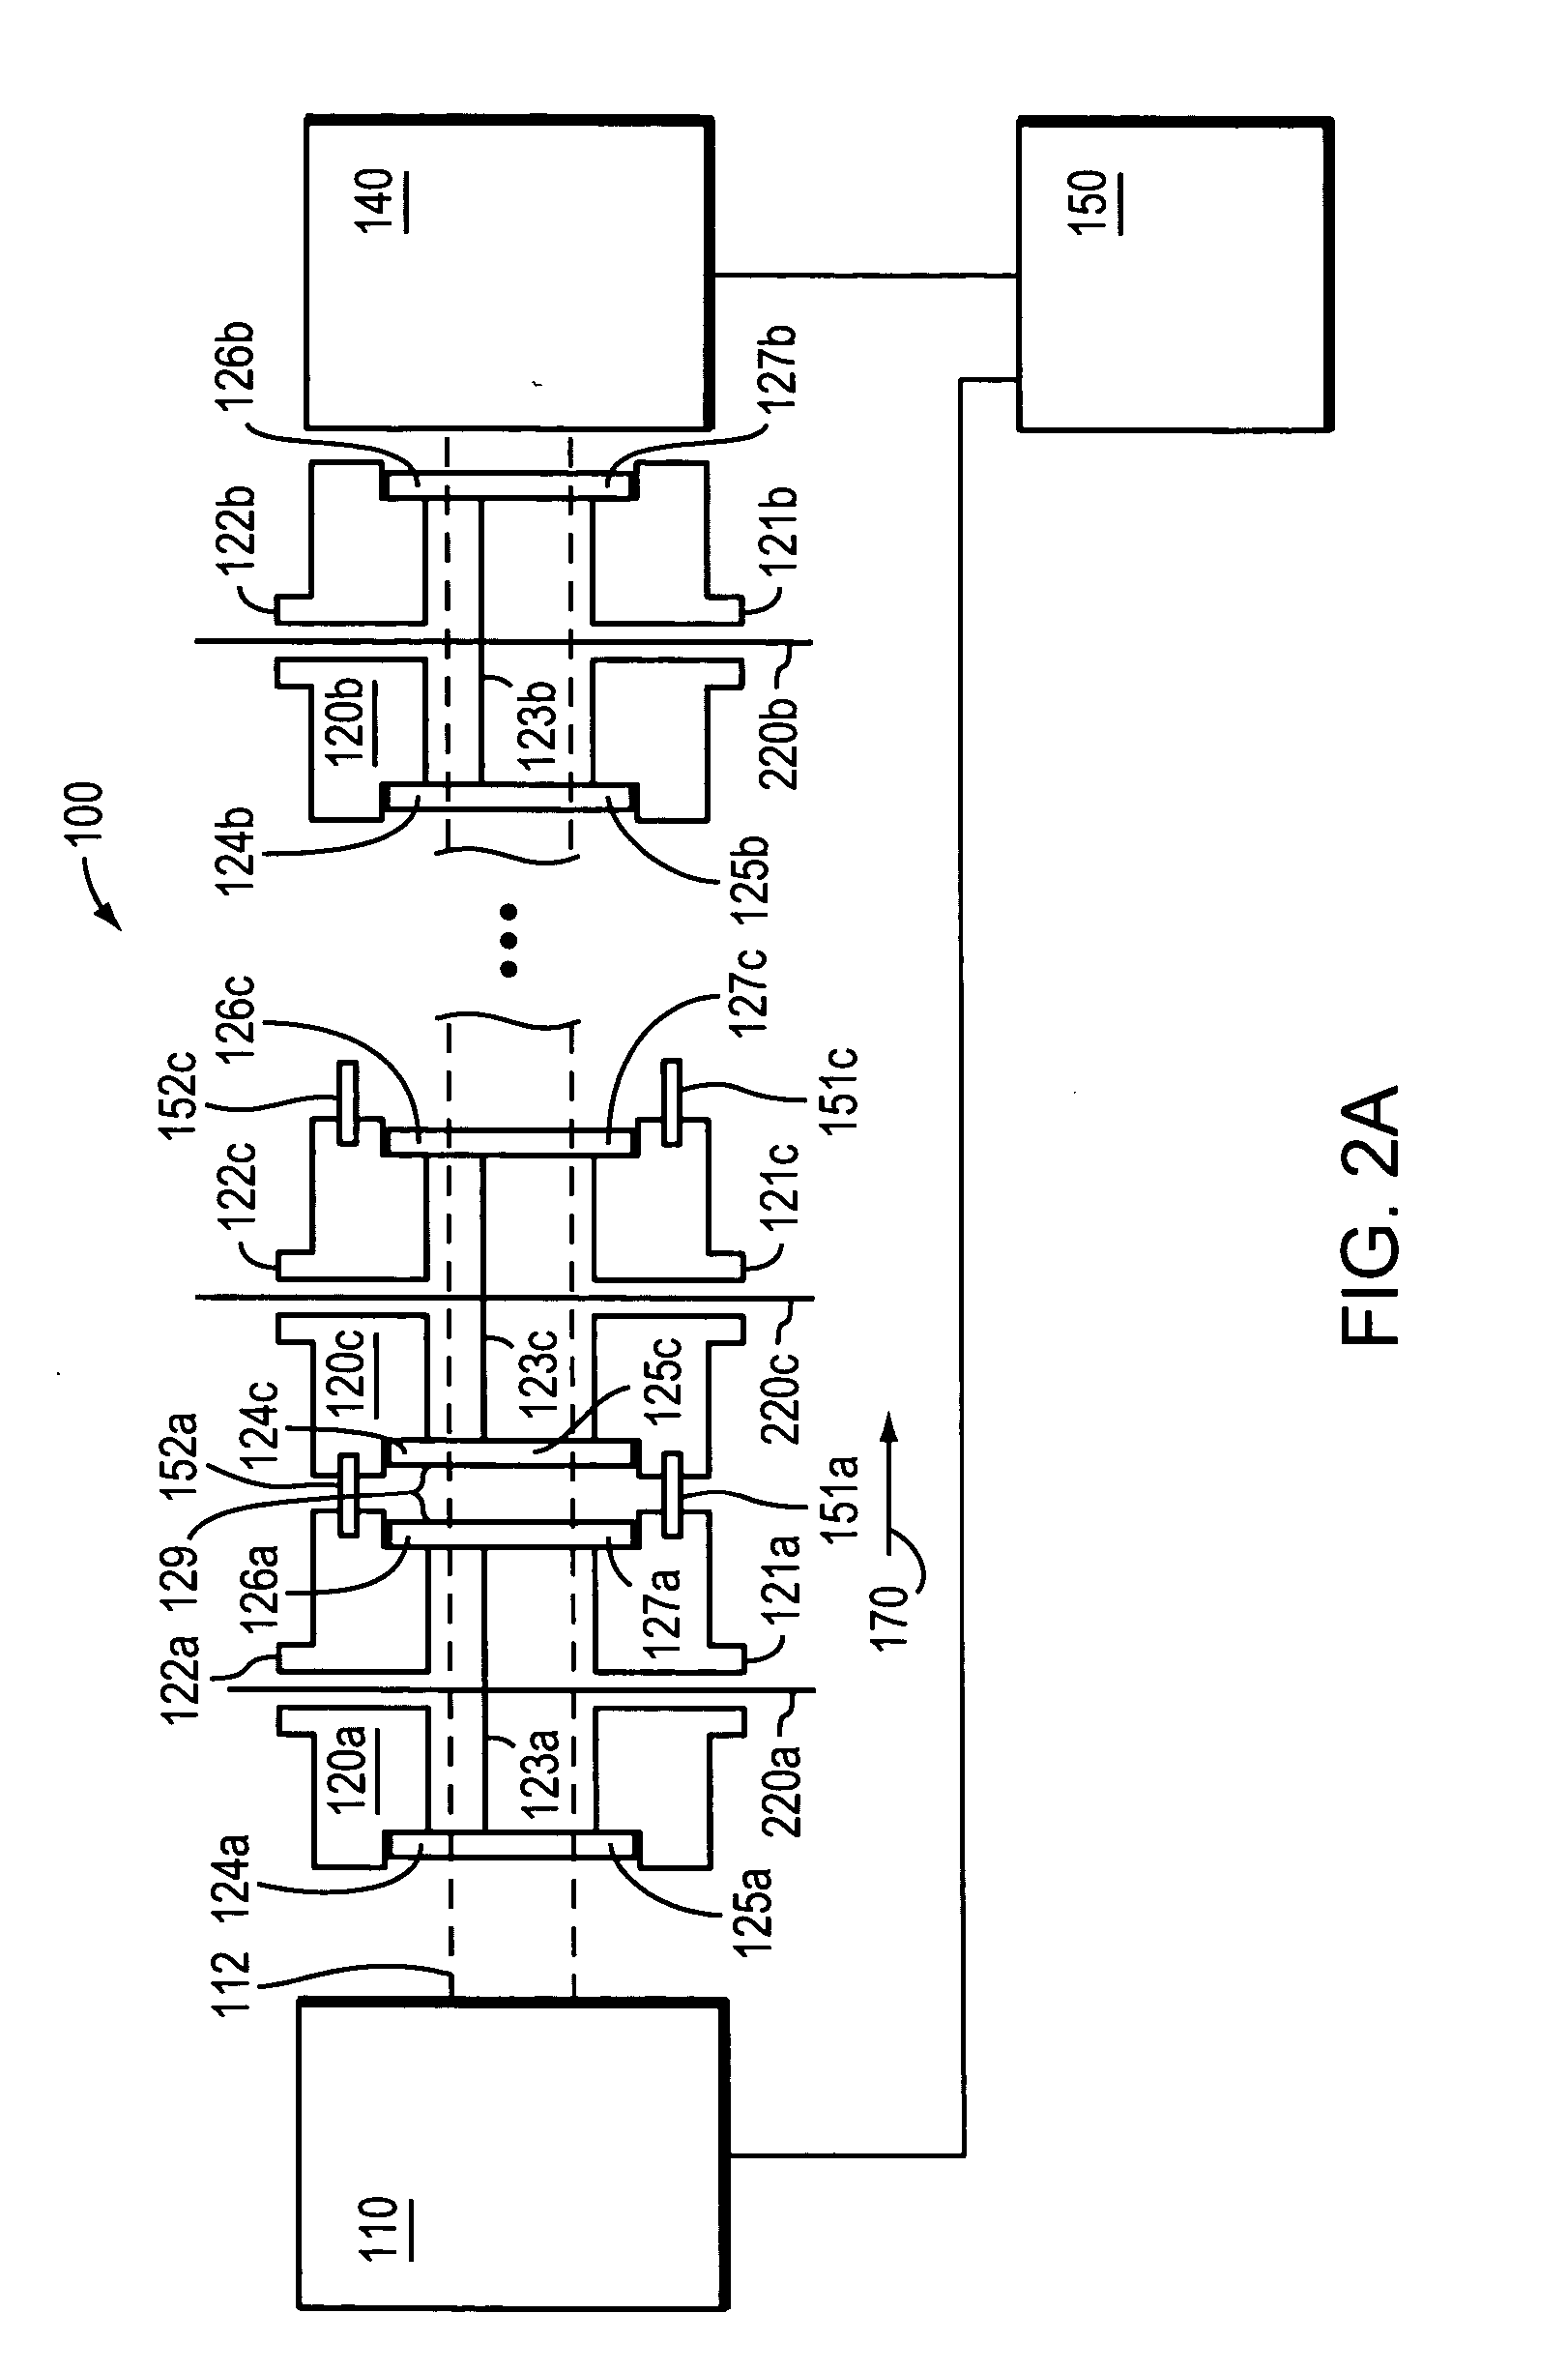 Linked extendable gas observation system for infrared absorption spectroscopy